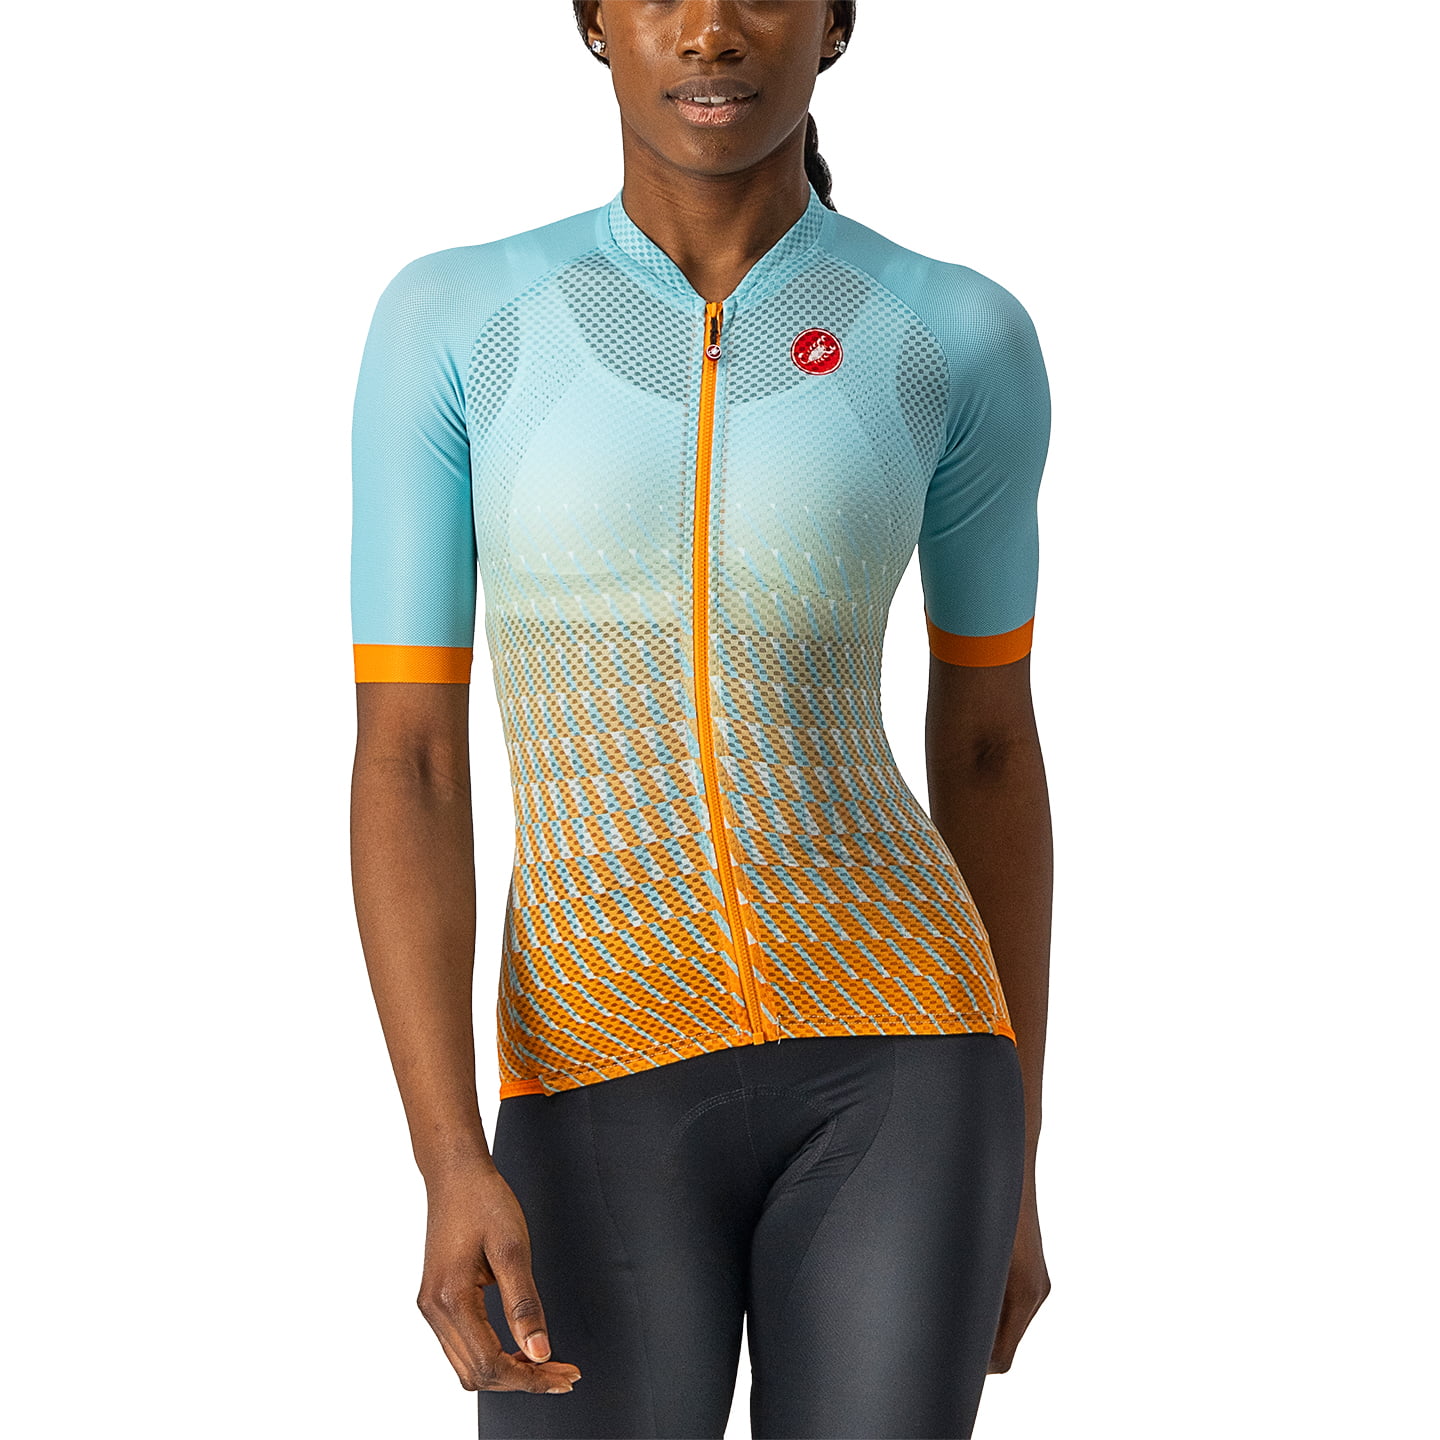 CASTELLI Climber’s 2.0 Women’s Jersey Women’s Short Sleeve Jersey, size M, Cycling jersey, Cycle clothing